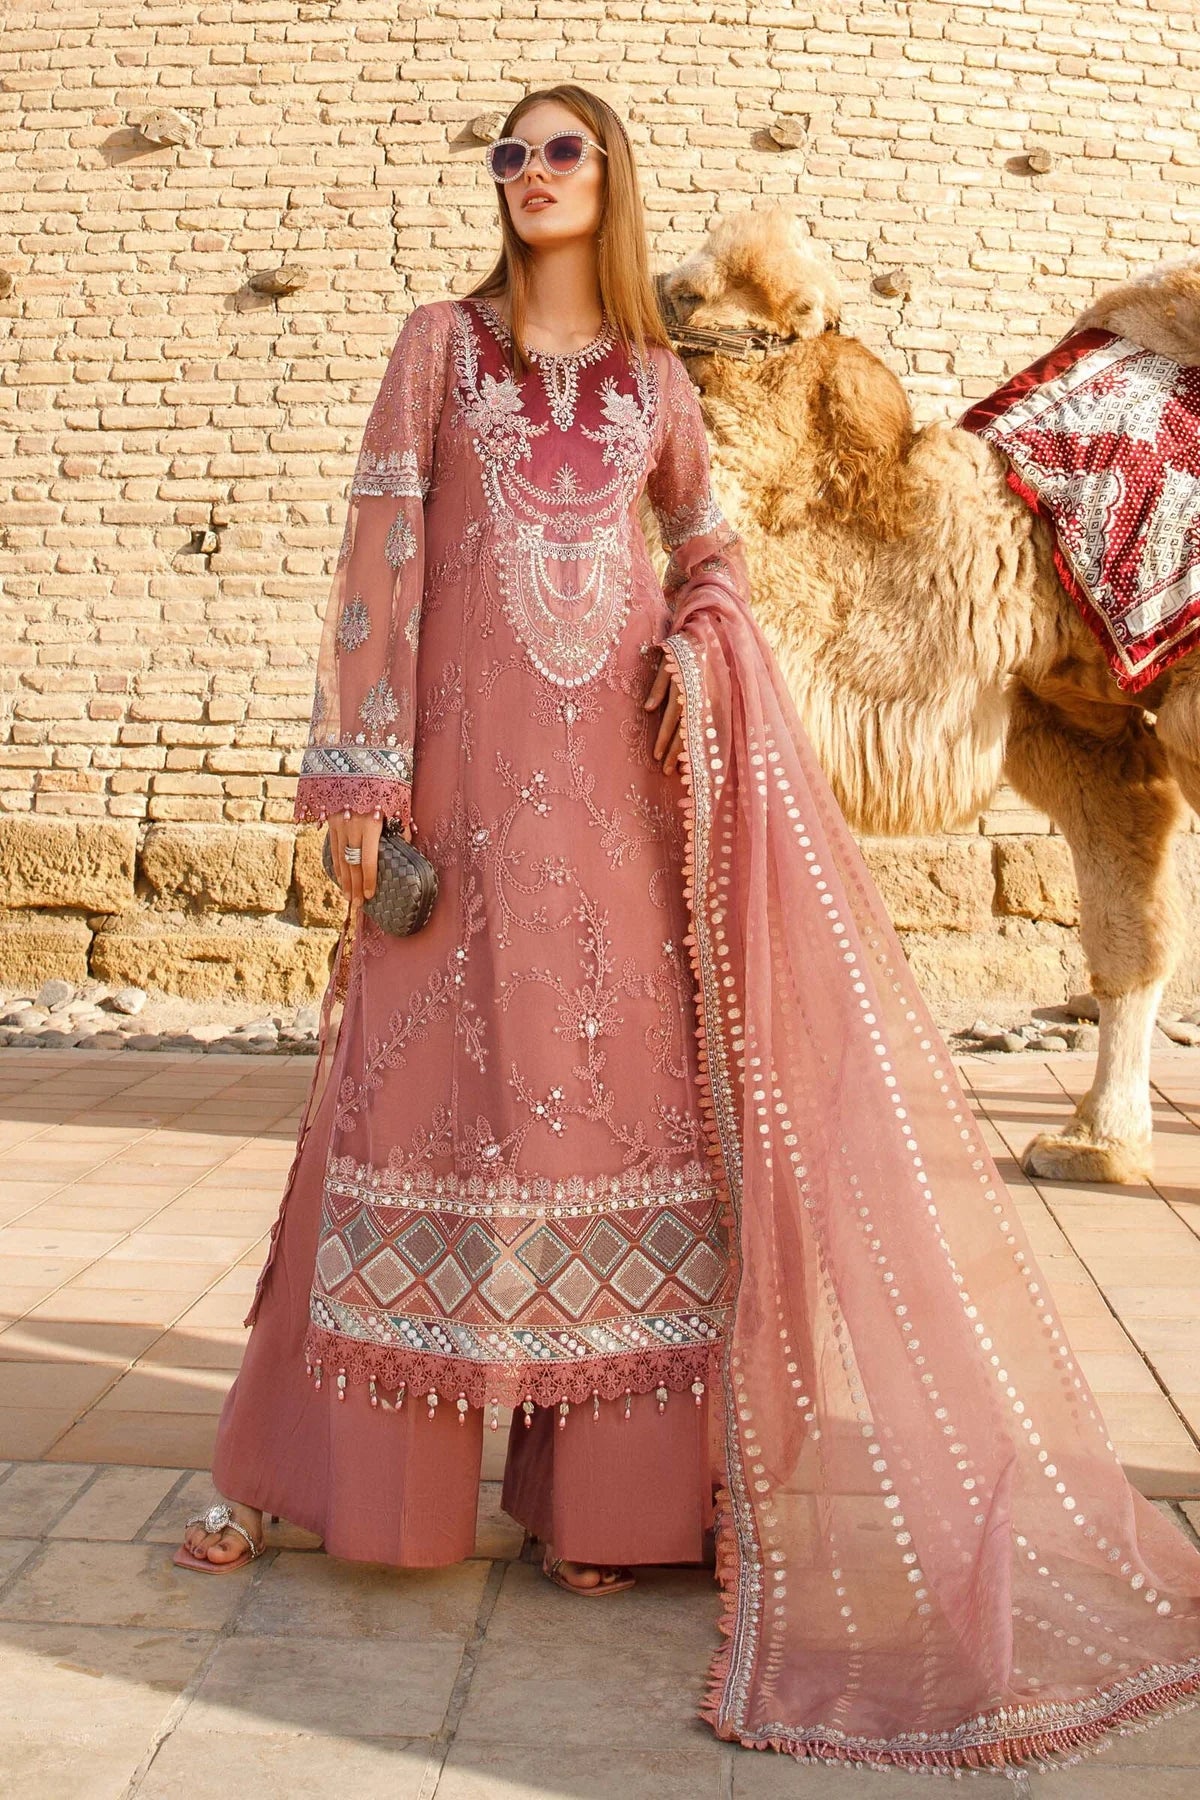 Maria B Inspired Embroidered Dusty Pink 3 Piece Outfit With Net Dupatta - Desi Posh